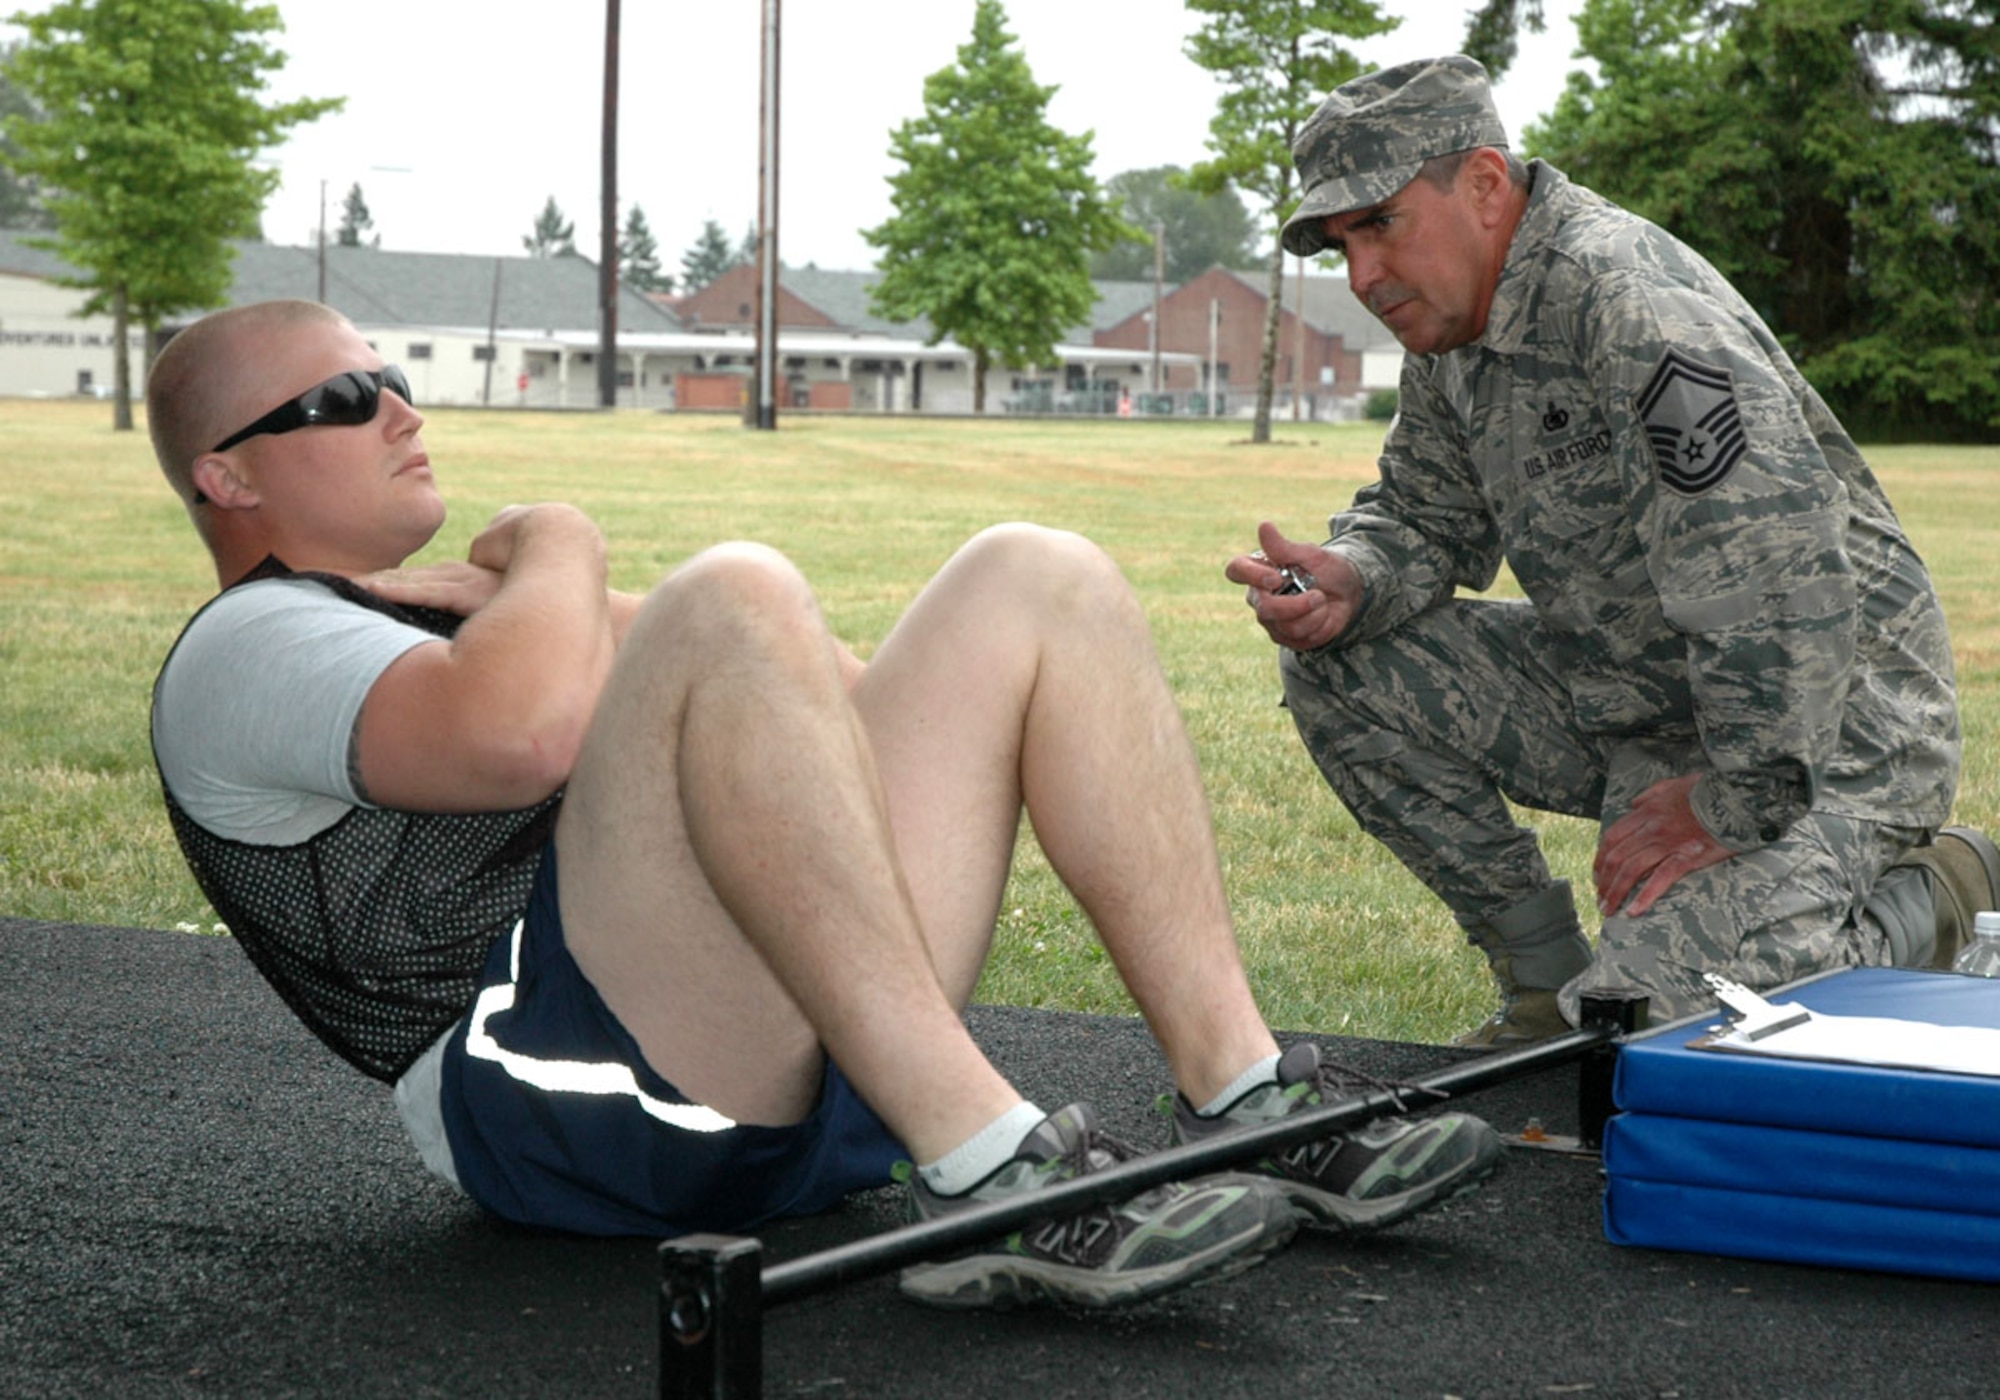 JOINT BASE LEWIS-MCCHORD, Wash. -- Staff Sgt. Karl Renfro, 446th Logistics Readiness Flight, demonstrates proper form situps under the watchful eye of his fitness monitor, Senior Master Sgt. Jeff Doll, 446th LRF, during a fitness assessment here July 10, 2010.  The new Air Force fitness program took effect July 1. The program will hold Airmen to more rigourous physical fitness standards in an effort to improve overall health and readiness. (U.S. Air Force photo/Staff Sgt. Grant Saylor)